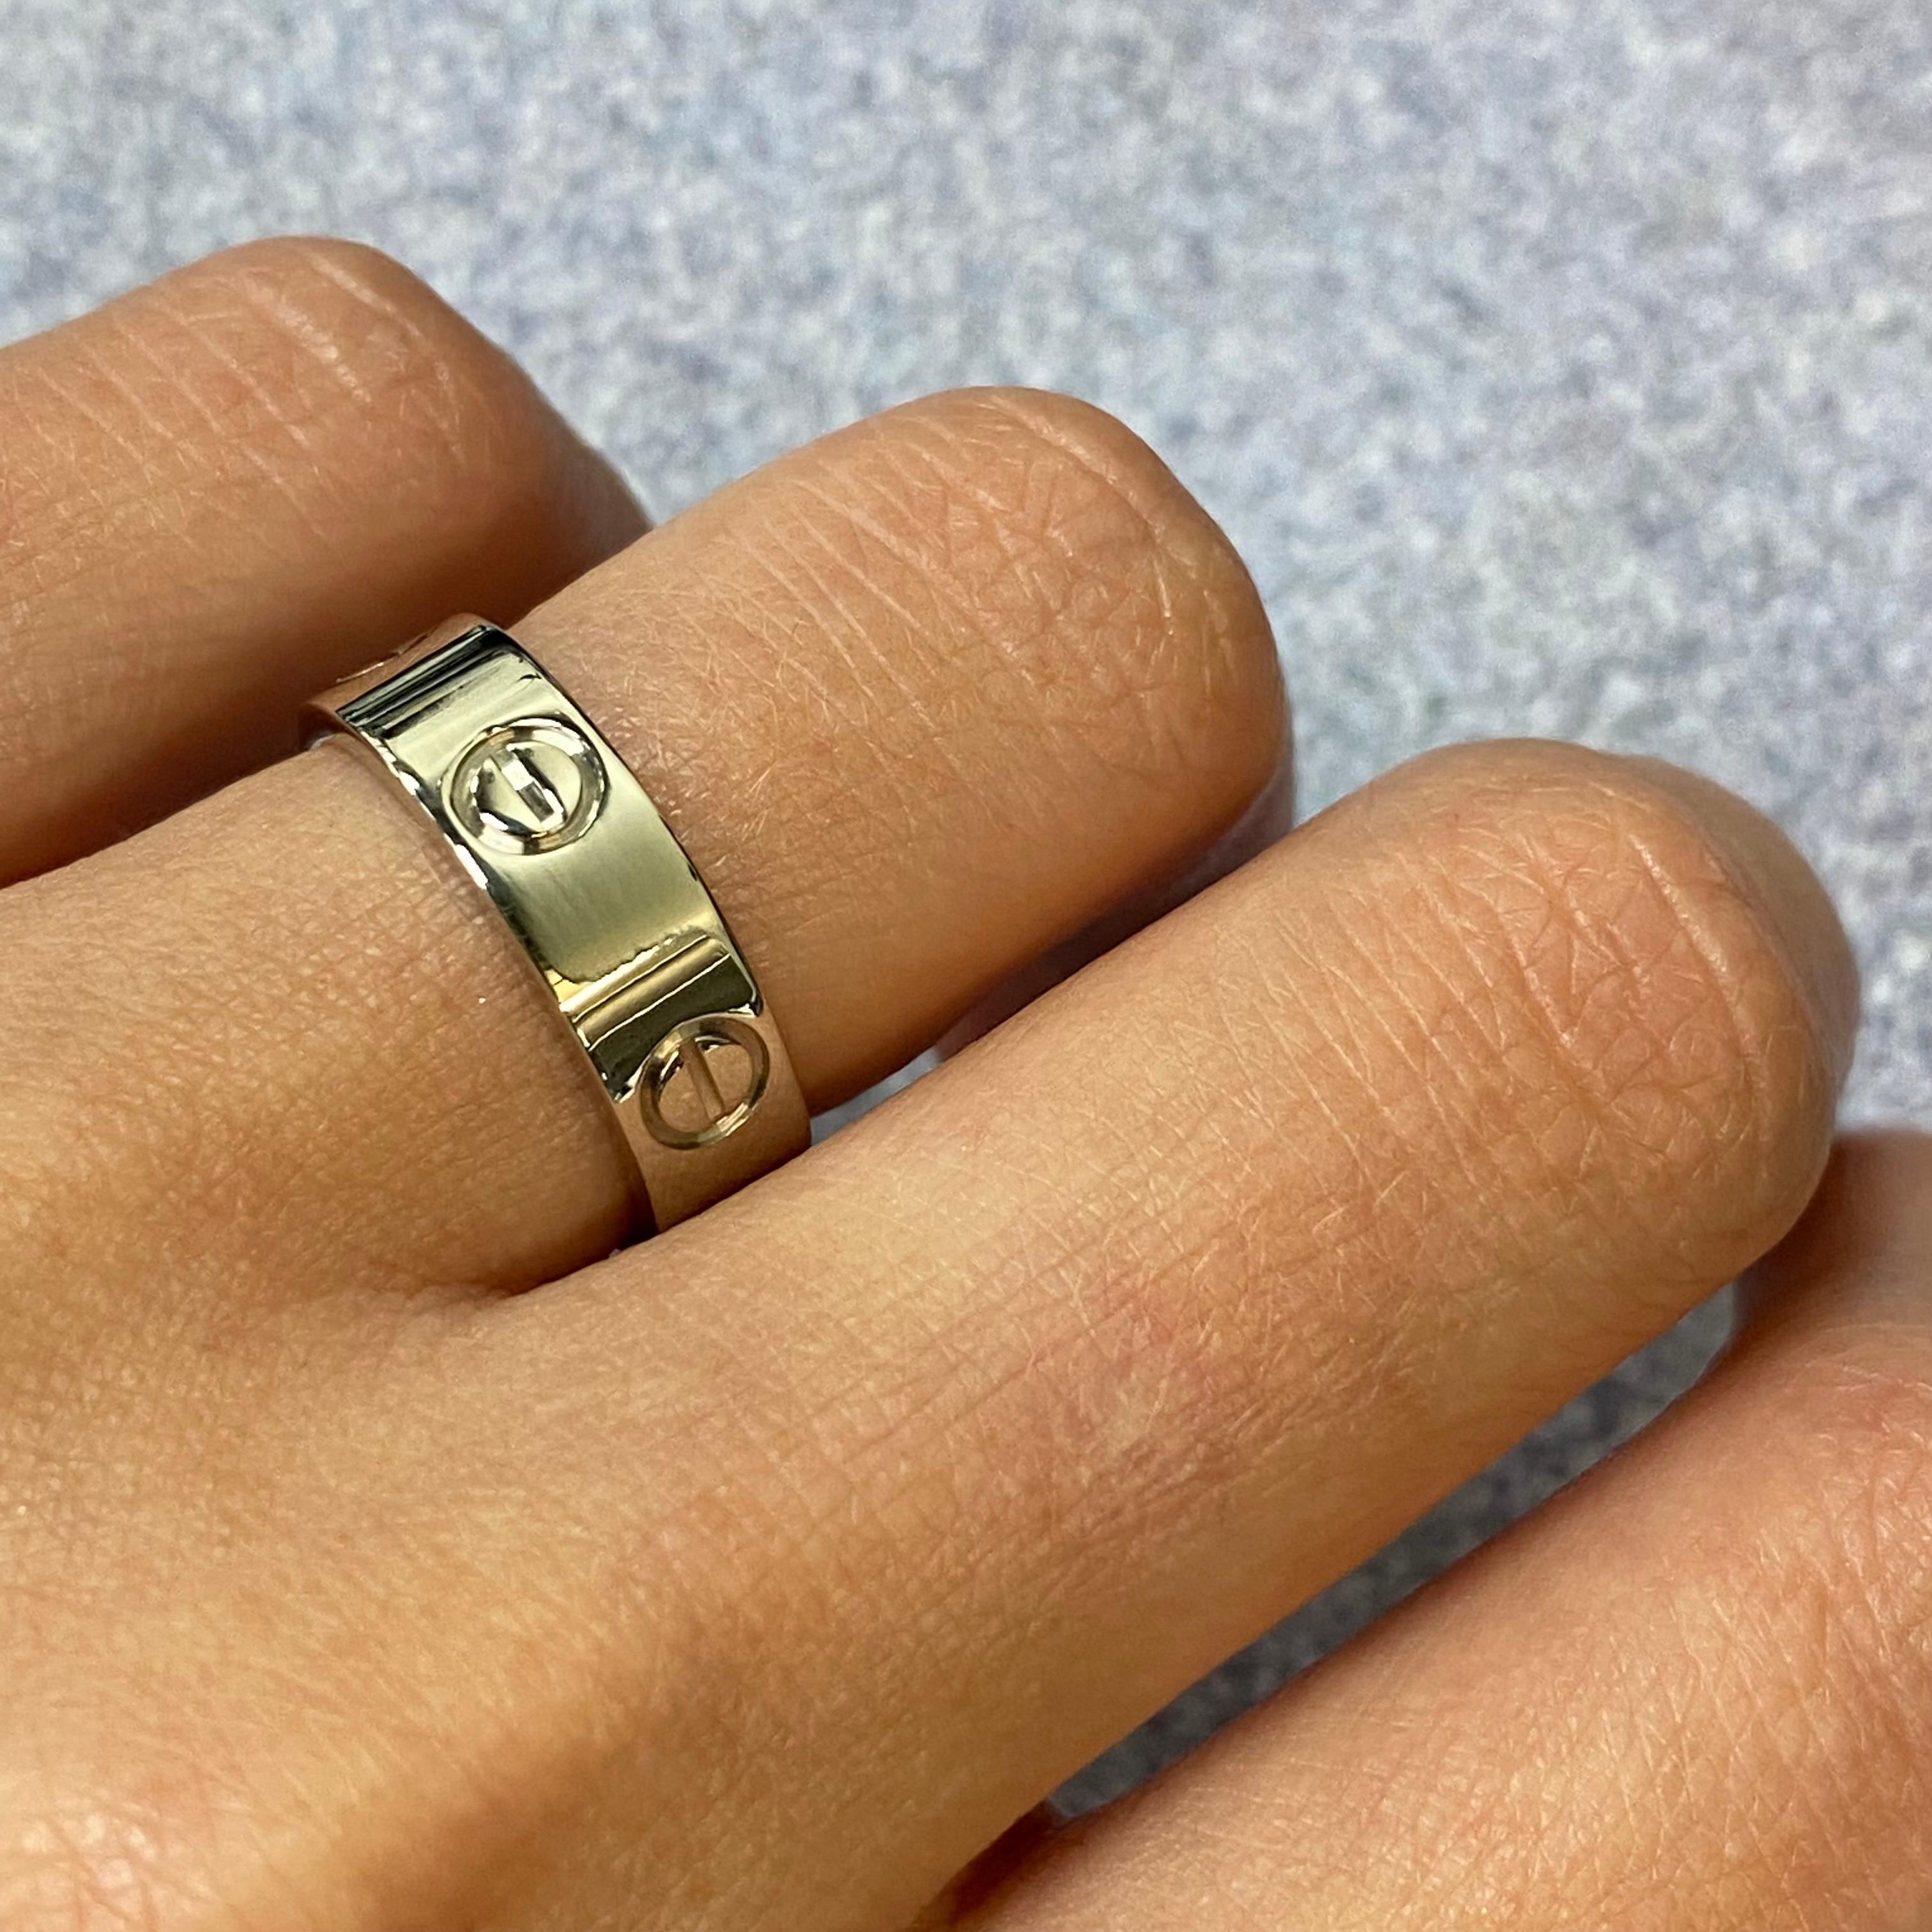 Cartier Love ring in 18K white gold. Width: 5.5mm. Ring size 51 US 5.75. Great pre-owned condition. Original box and papers are not included. Comes with presentable gift box. 
